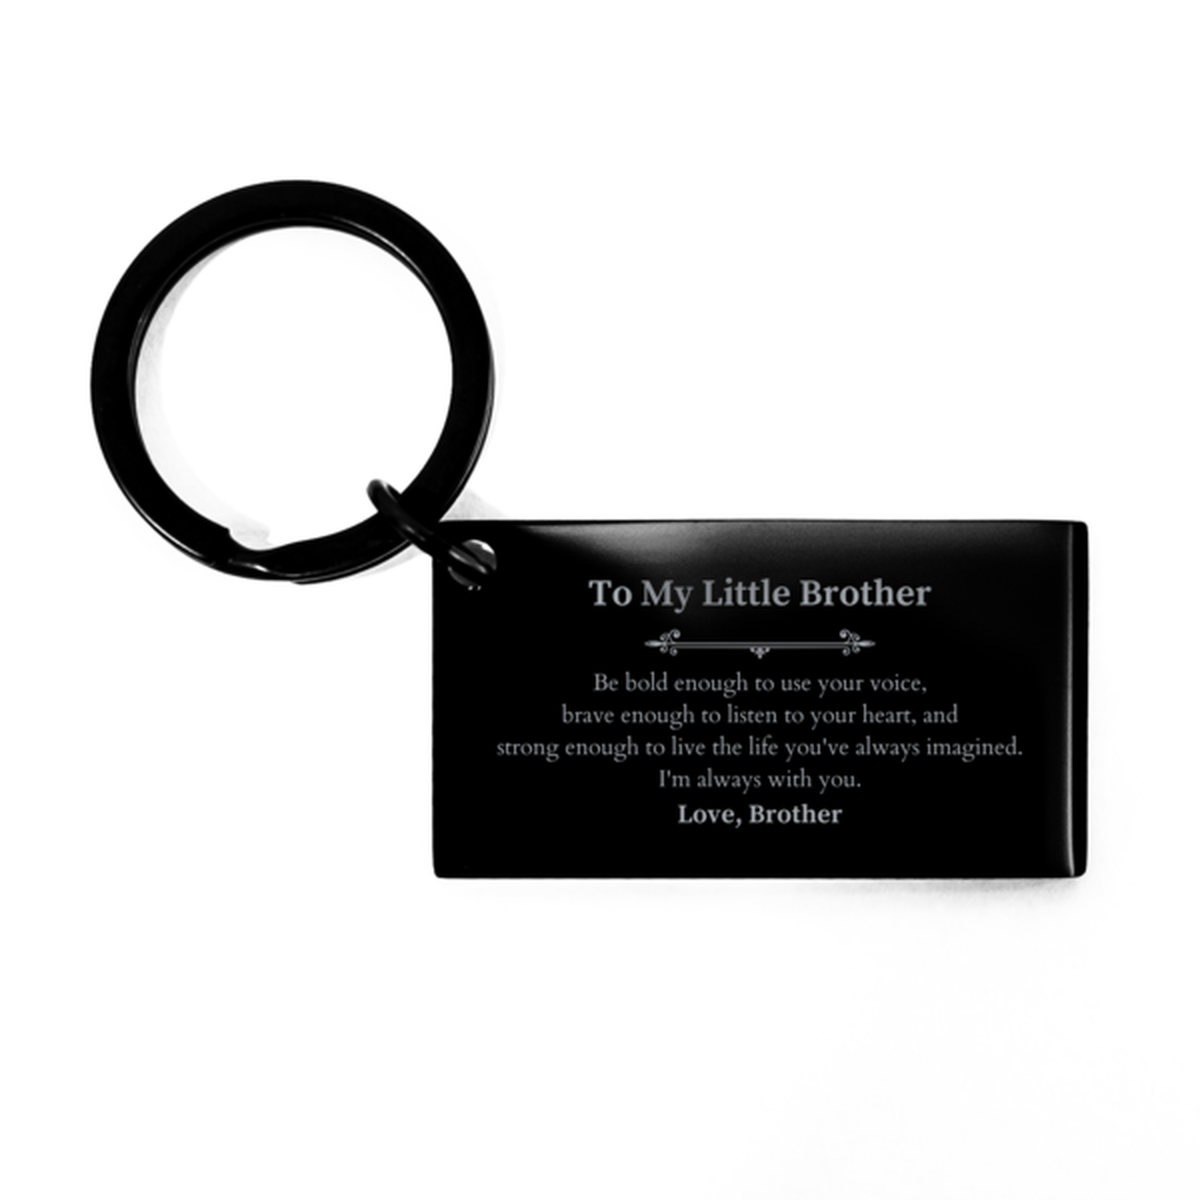 Keepsake Little Brother Keychain Gift Idea Graduation Christmas Birthday Little Brother from Brother, Little Brother Be bold enough to use your voice, brave enough to listen to your heart. Love, Brother